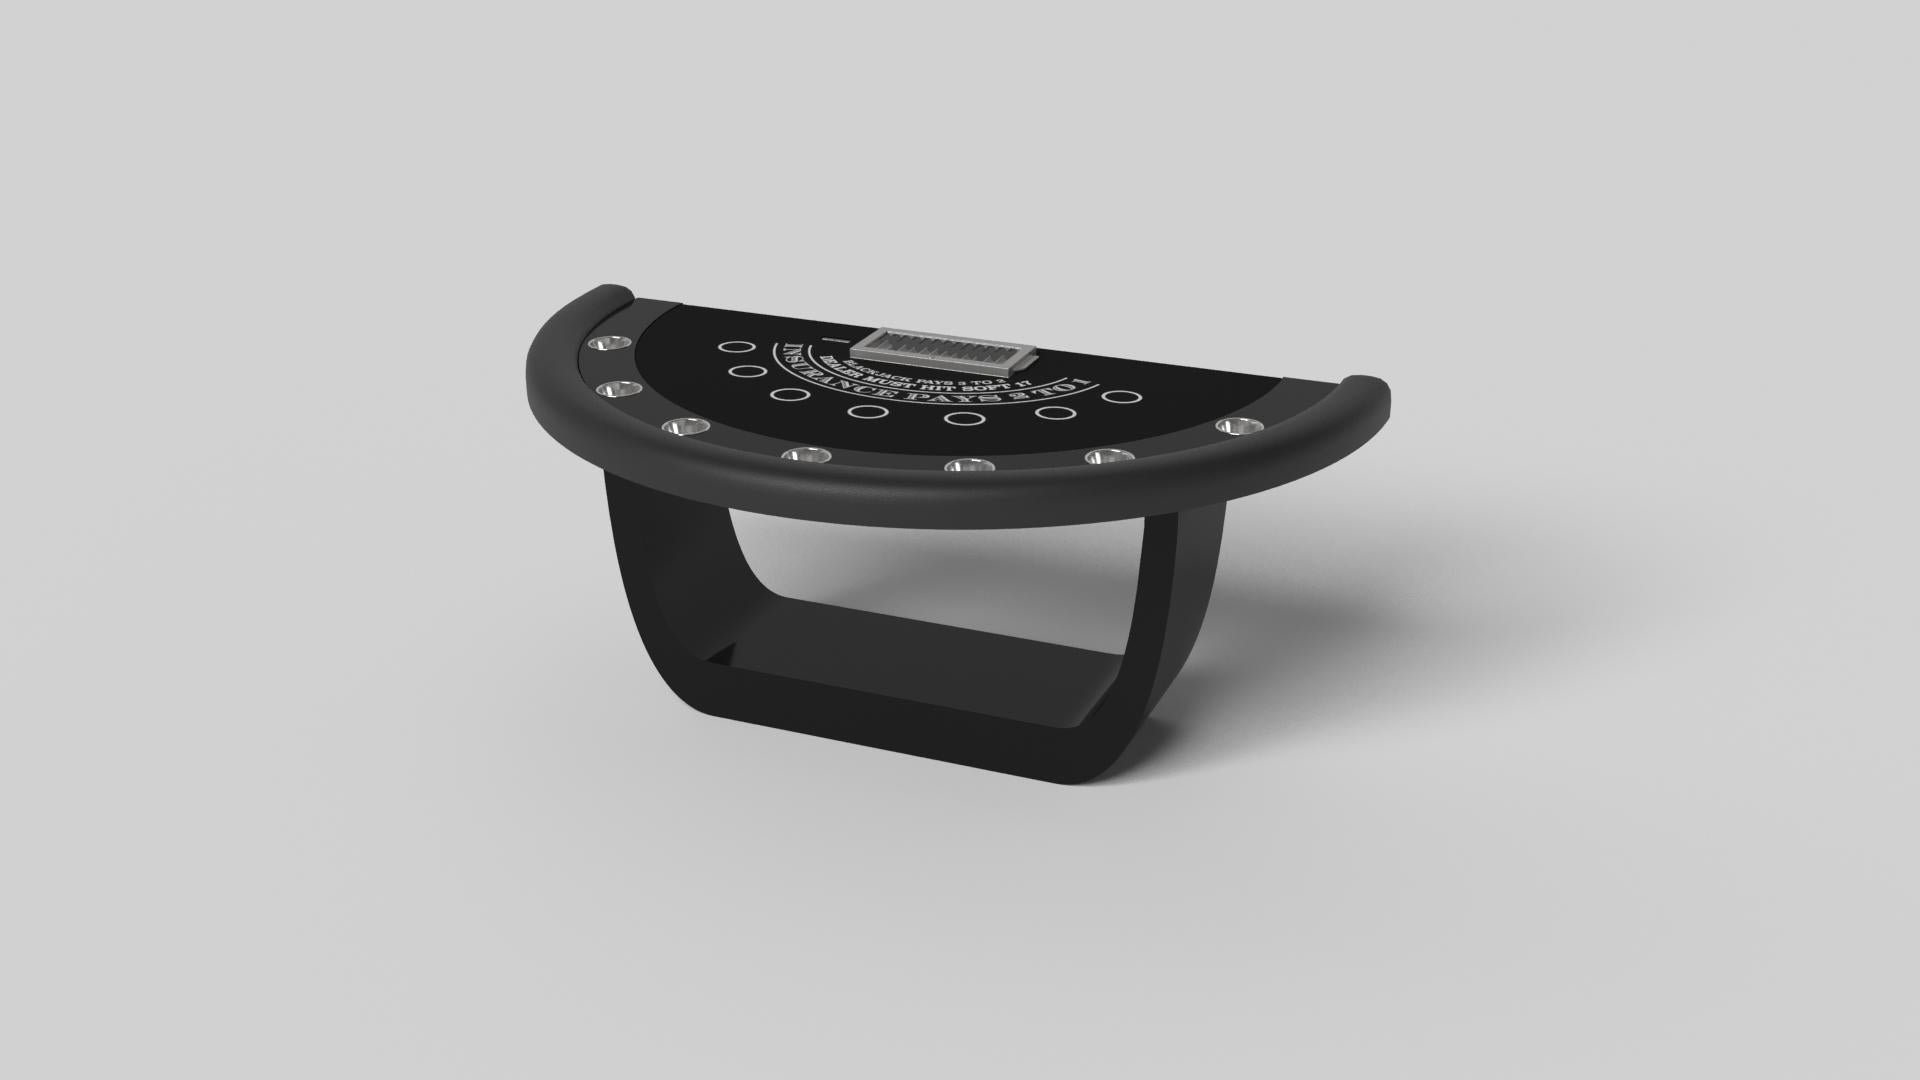 Handcrafted with intricate accents and a precision-carved curved base, the Sid blackjack table in black encompasses a series of smooth edges, distinctive details, and unconventional elements in one unique expression of luxury design. Built by hand